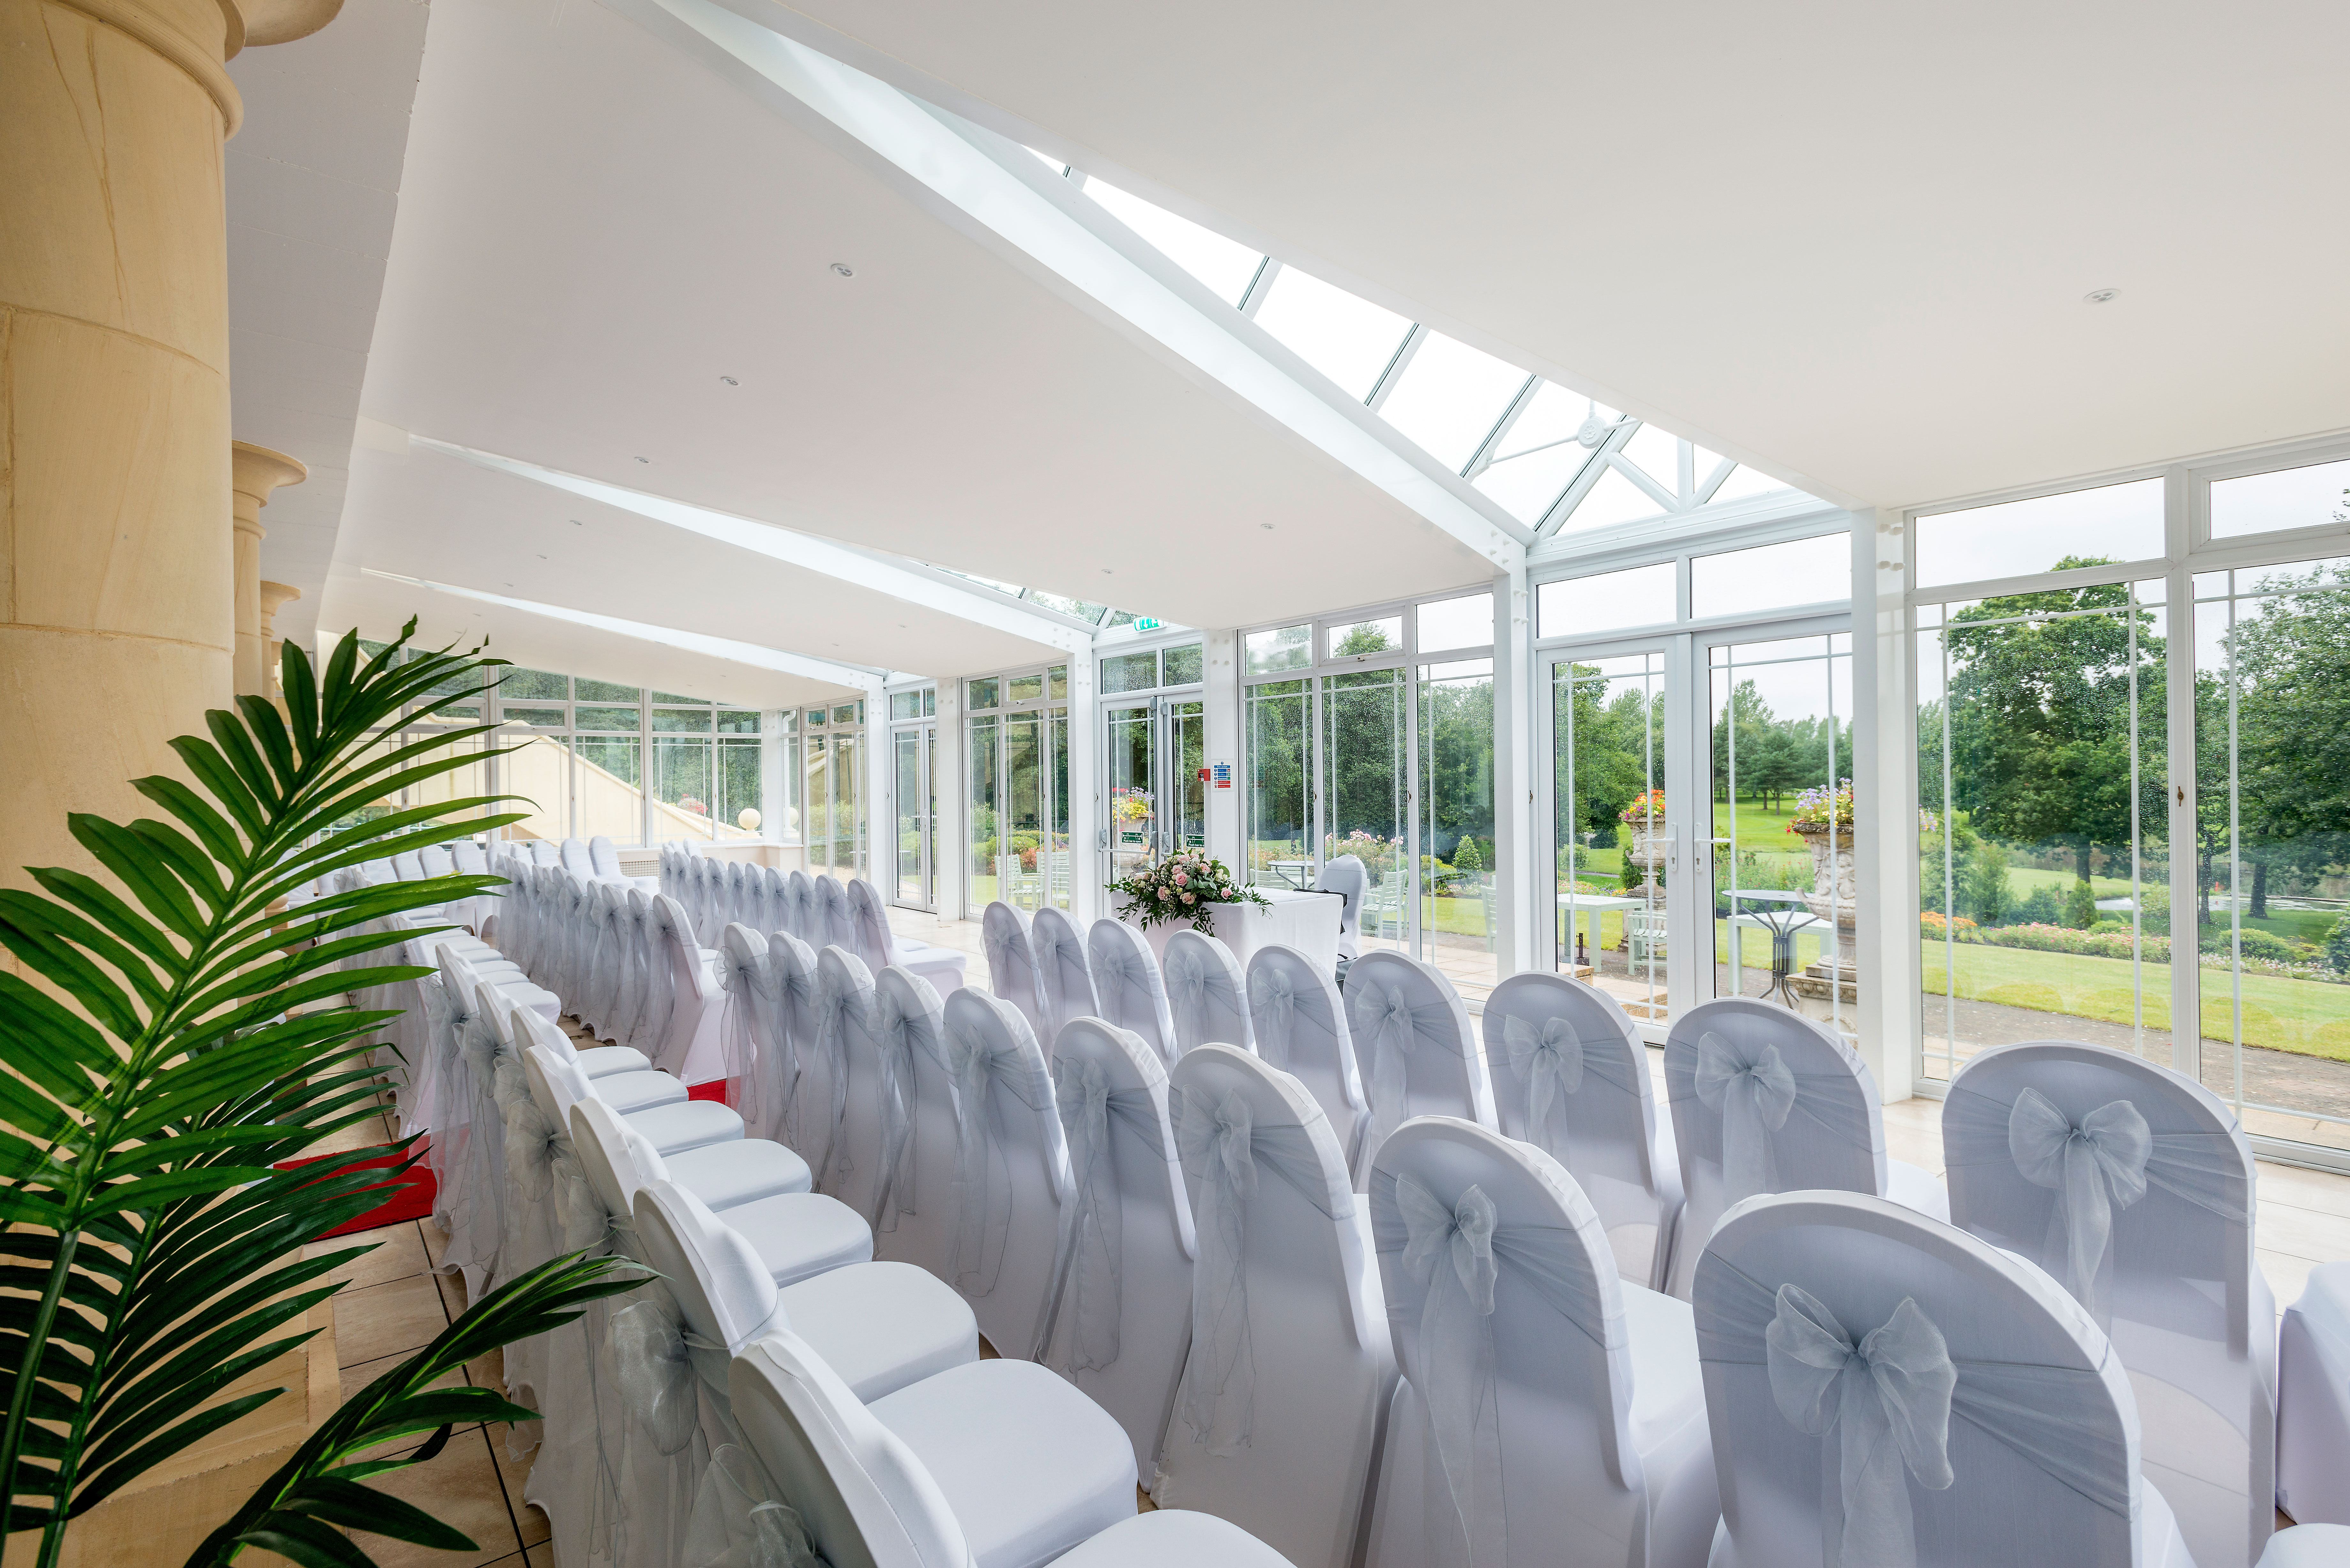 Conservatory wedding set up with view of golf course